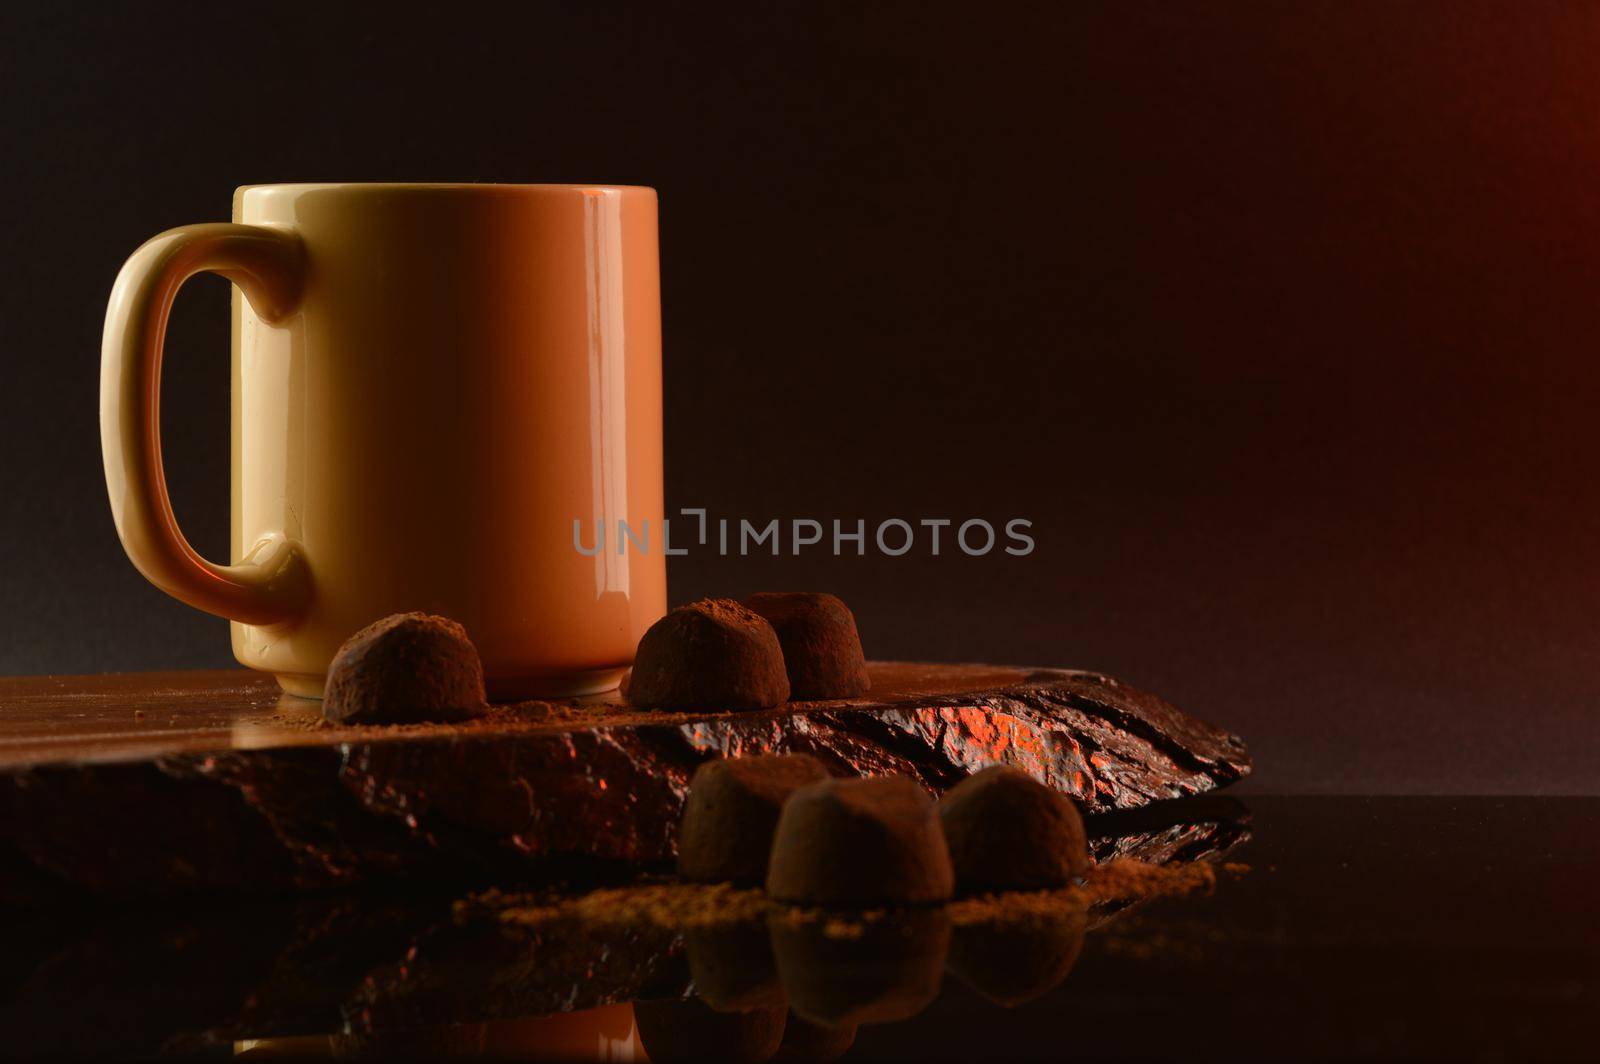 A composition of coffee and fine chocolate truffles for a tasteful display.